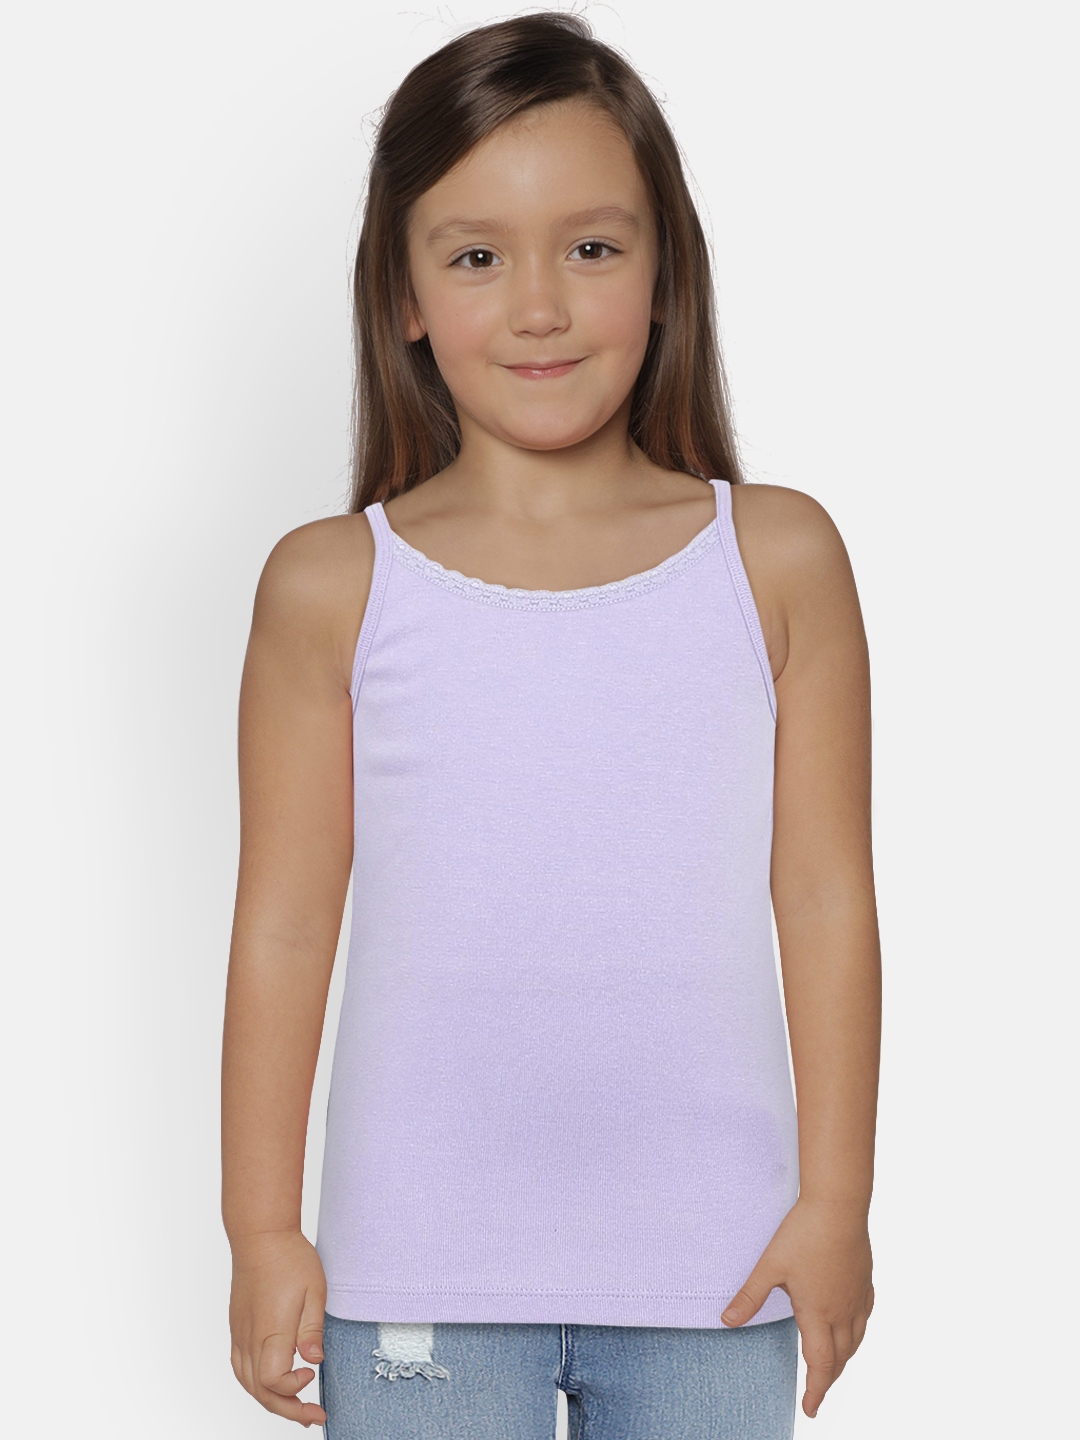 Buy The Childrens Place Lavender Solid Camisole 20590601170 - Camisoles ...